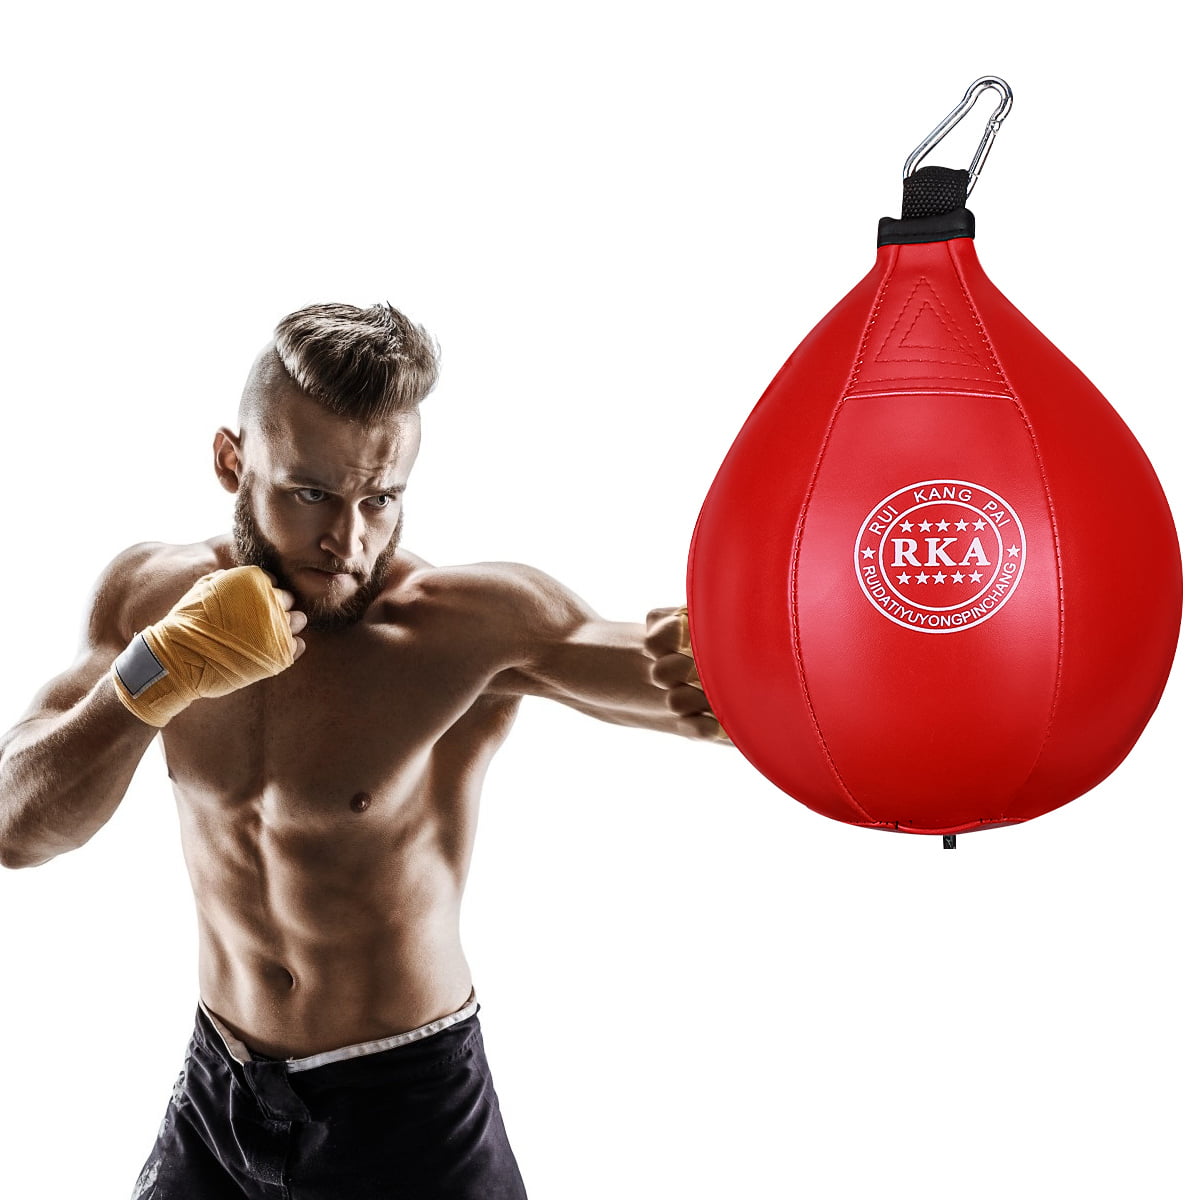 Wall,Smooth Surface Tonyko Portable Stress Reliever Speed Punching Ball Ideal for Relaxing on Desk